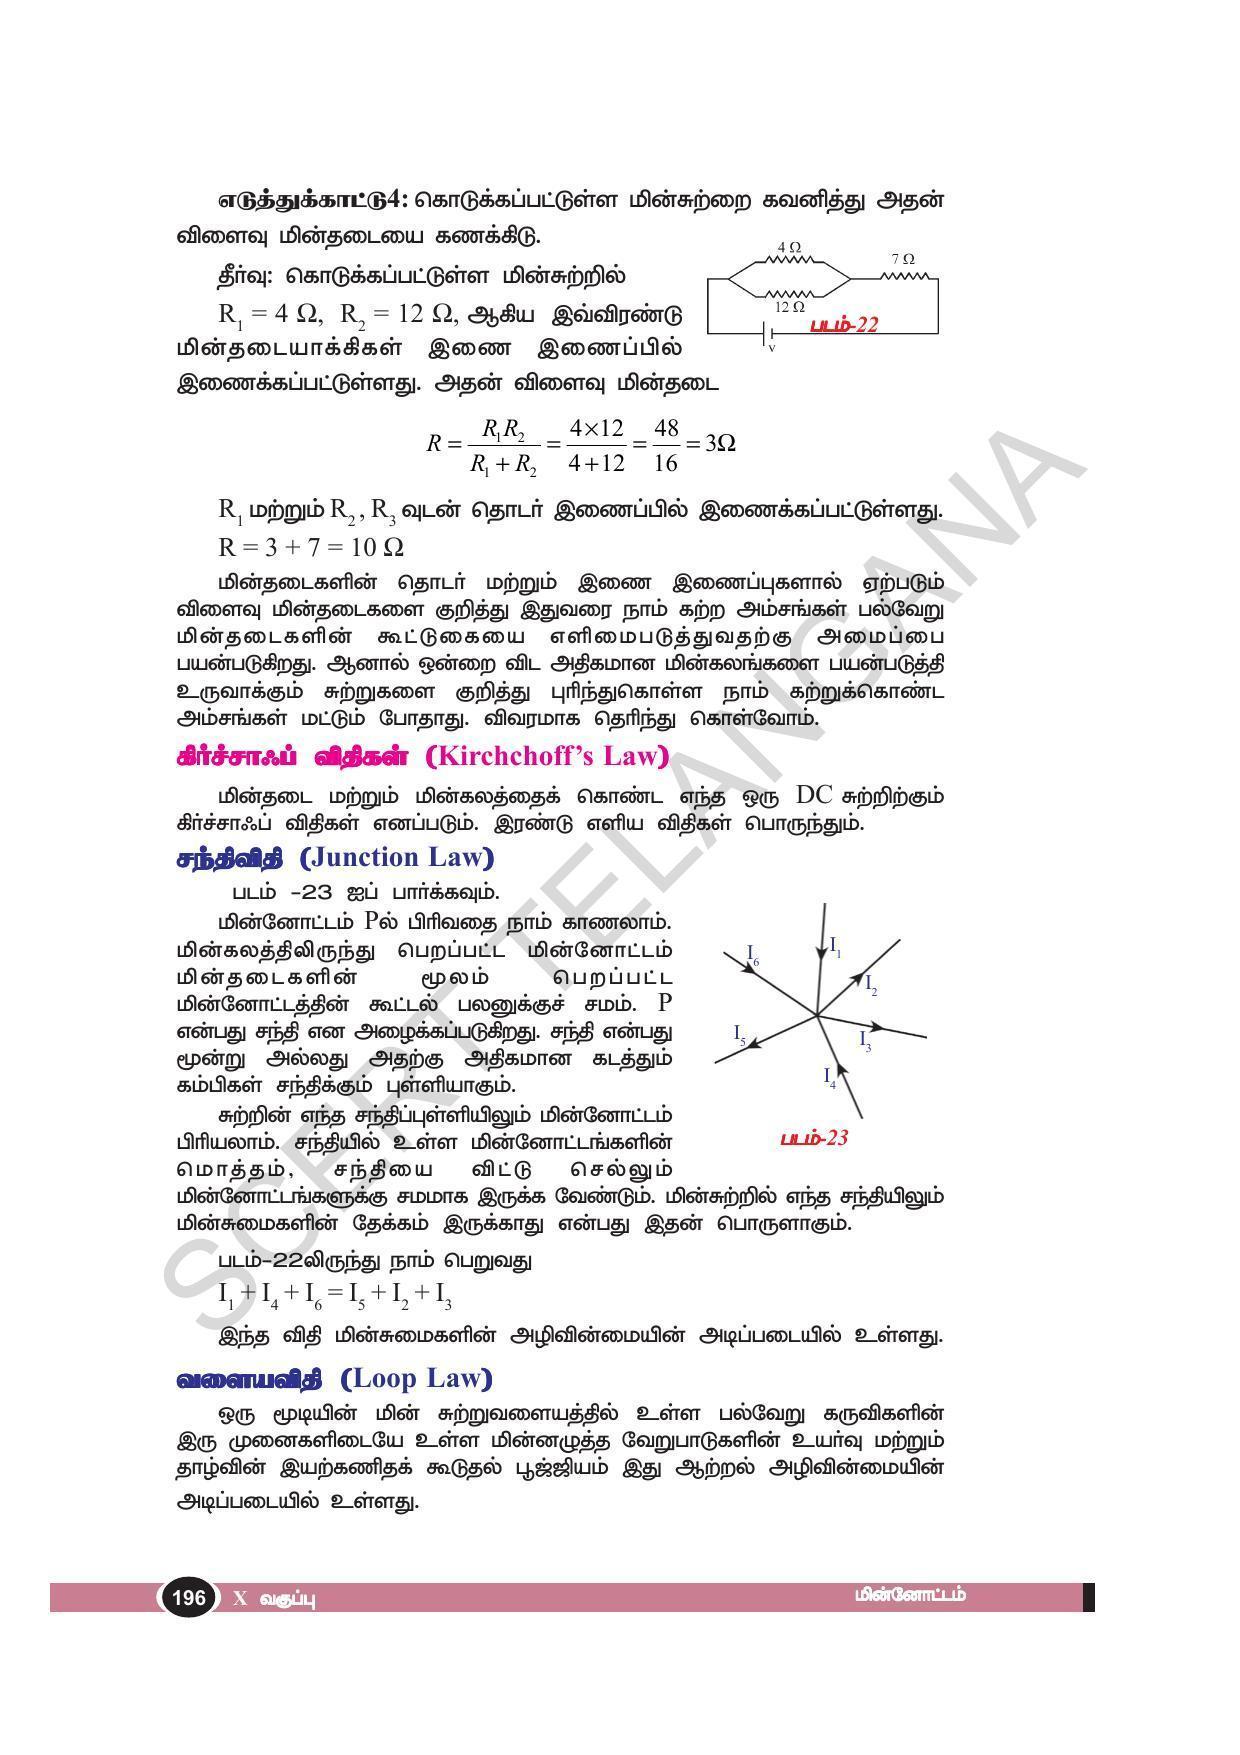 TS SCERT Class 10 Physical Science(Tamil Medium) Text Book - Page 208